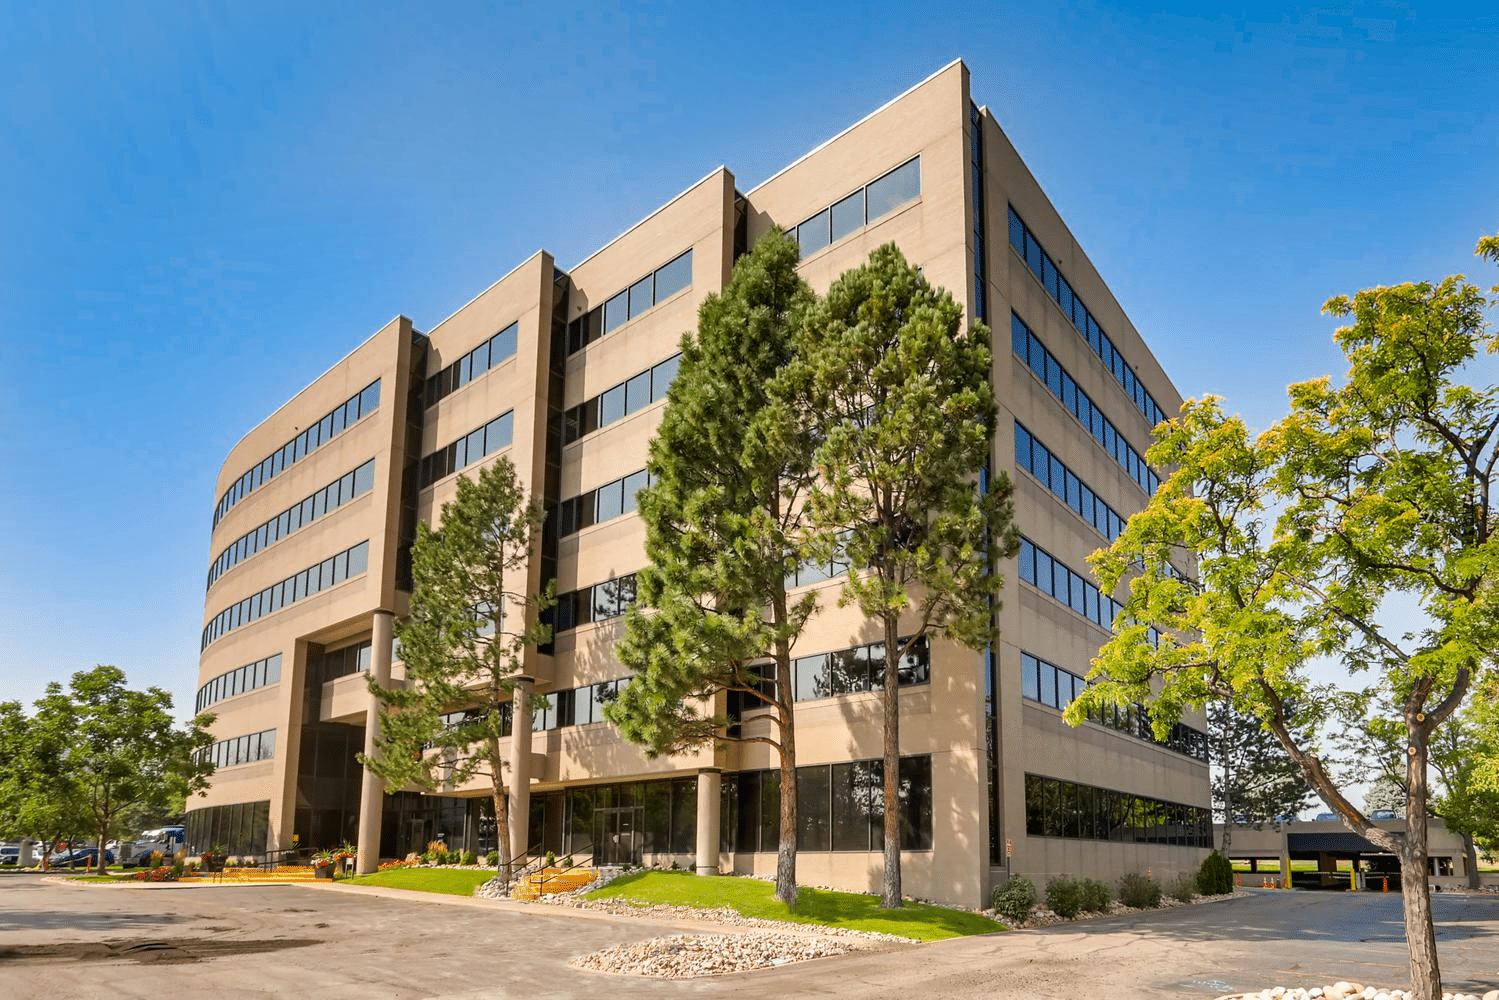 Orchard Pointe is office property in Southeast Denver, Colorado central of Denver Technological Center